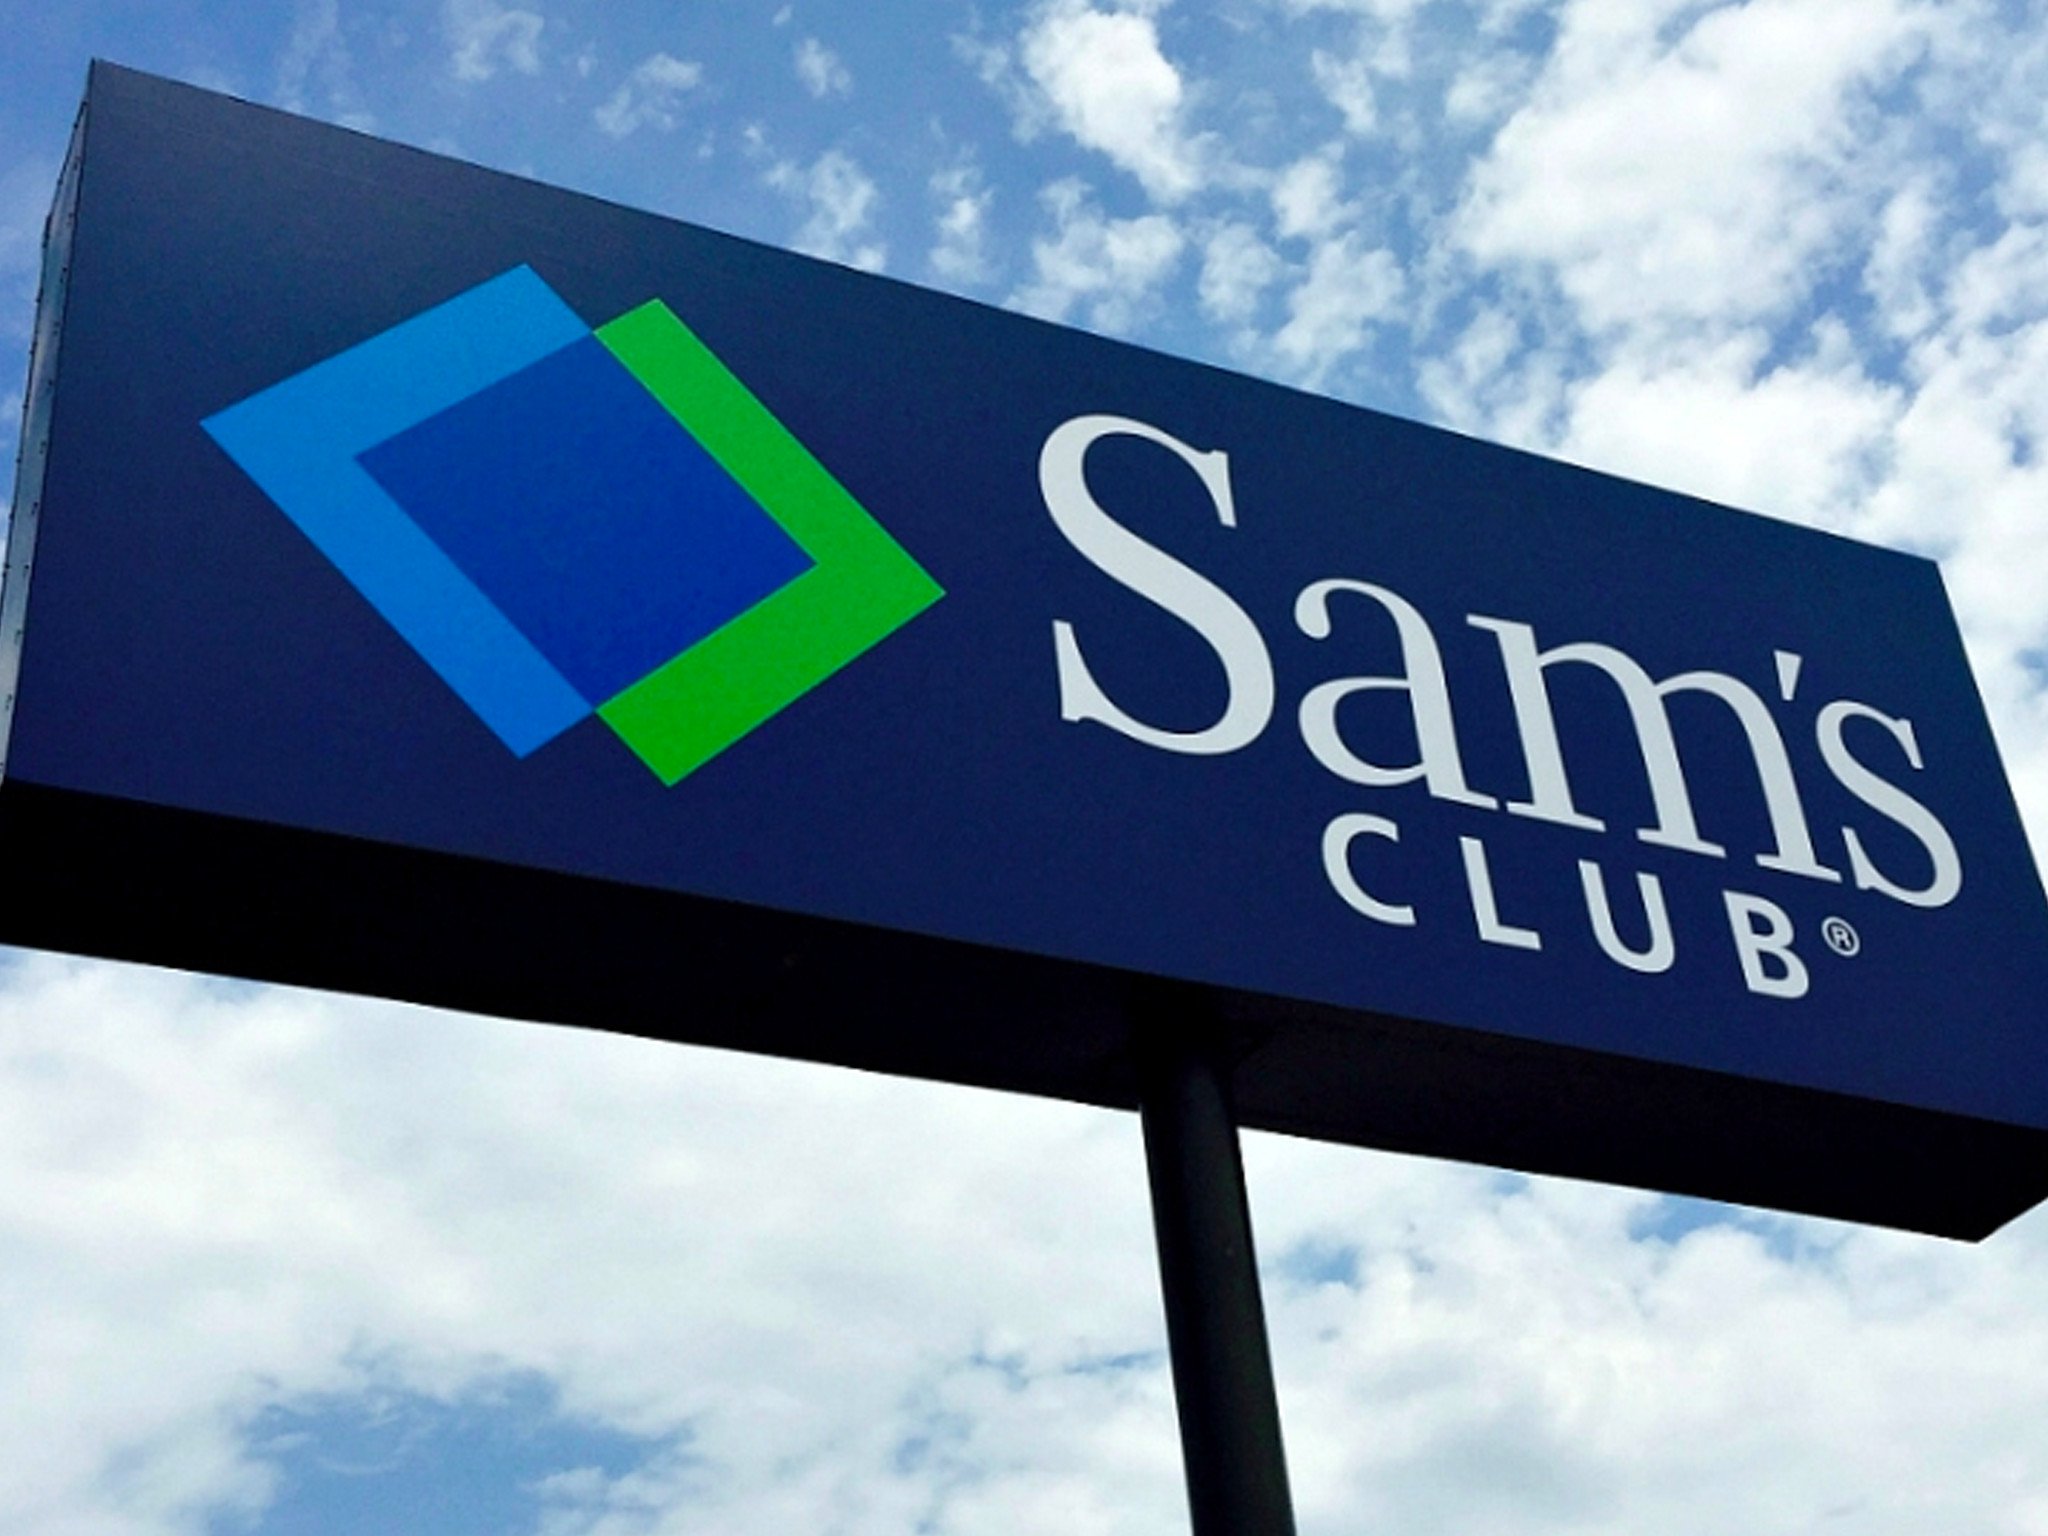 sam-s-club-members-can-get-the-best-deals-by-looking-over-its-black